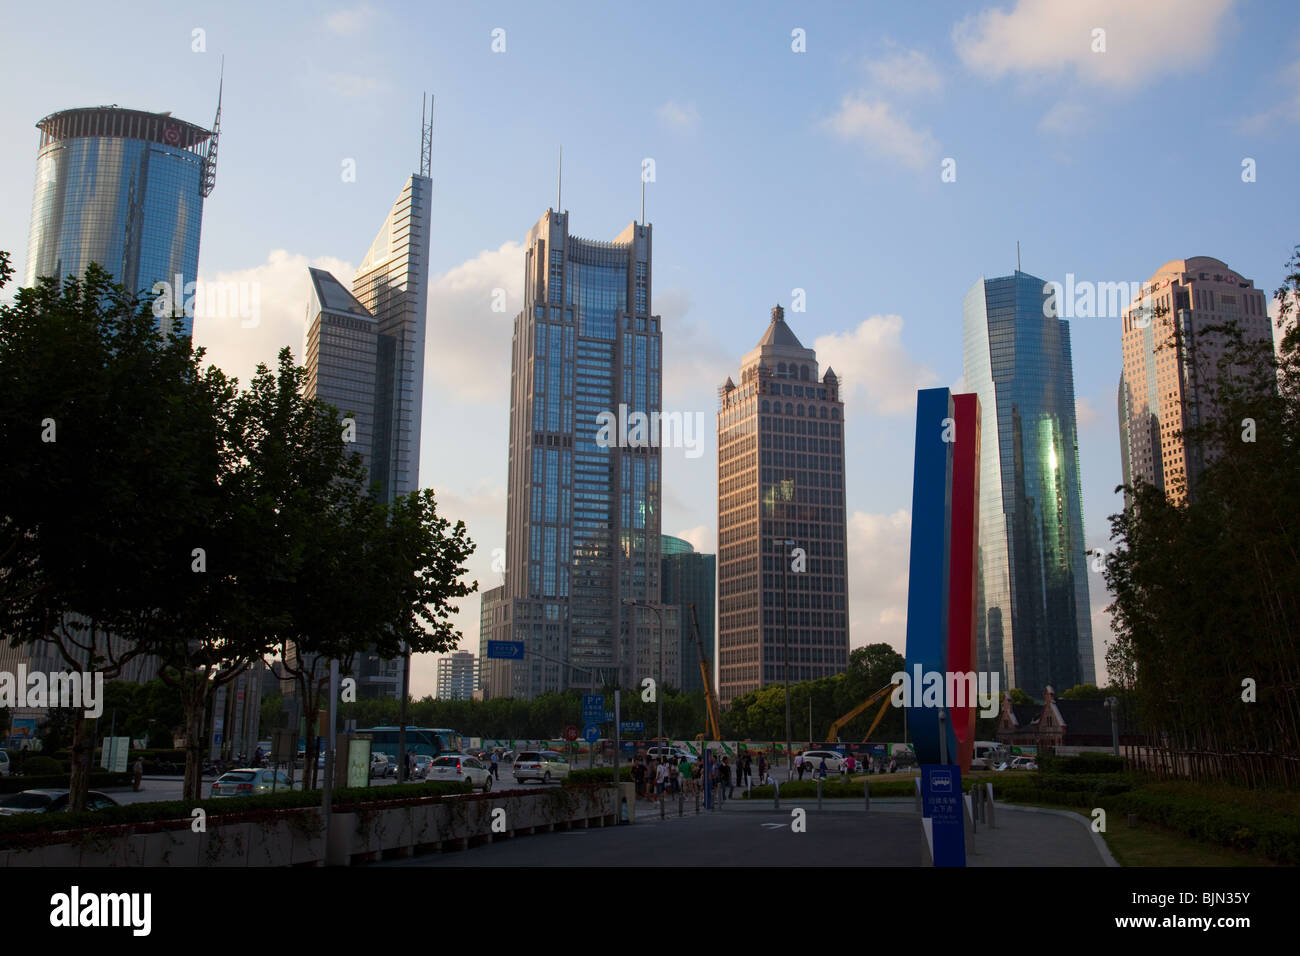 Pudong, Lujiazui financial district in Shanghai, China, Stock Photo